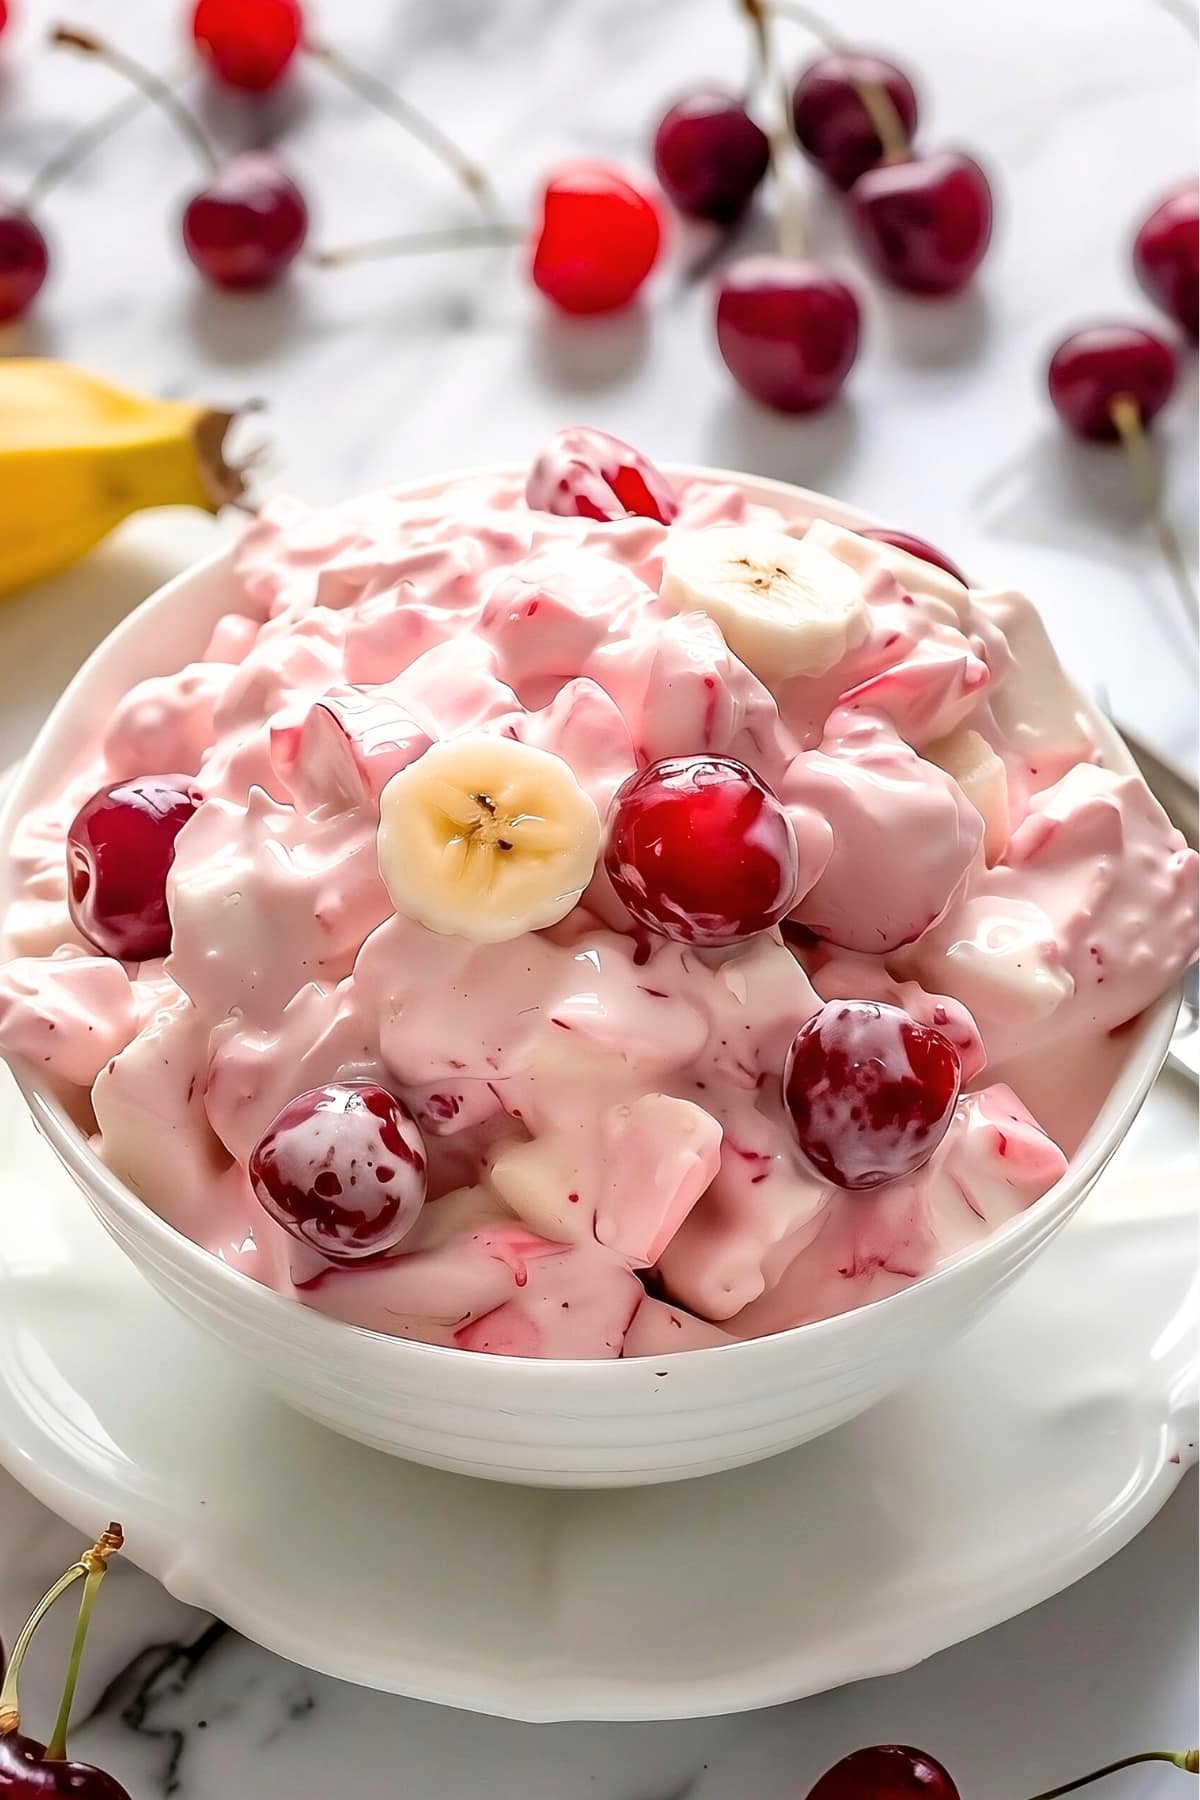 Creamy better than sex fruit salad garnished with banana slices and cherries.